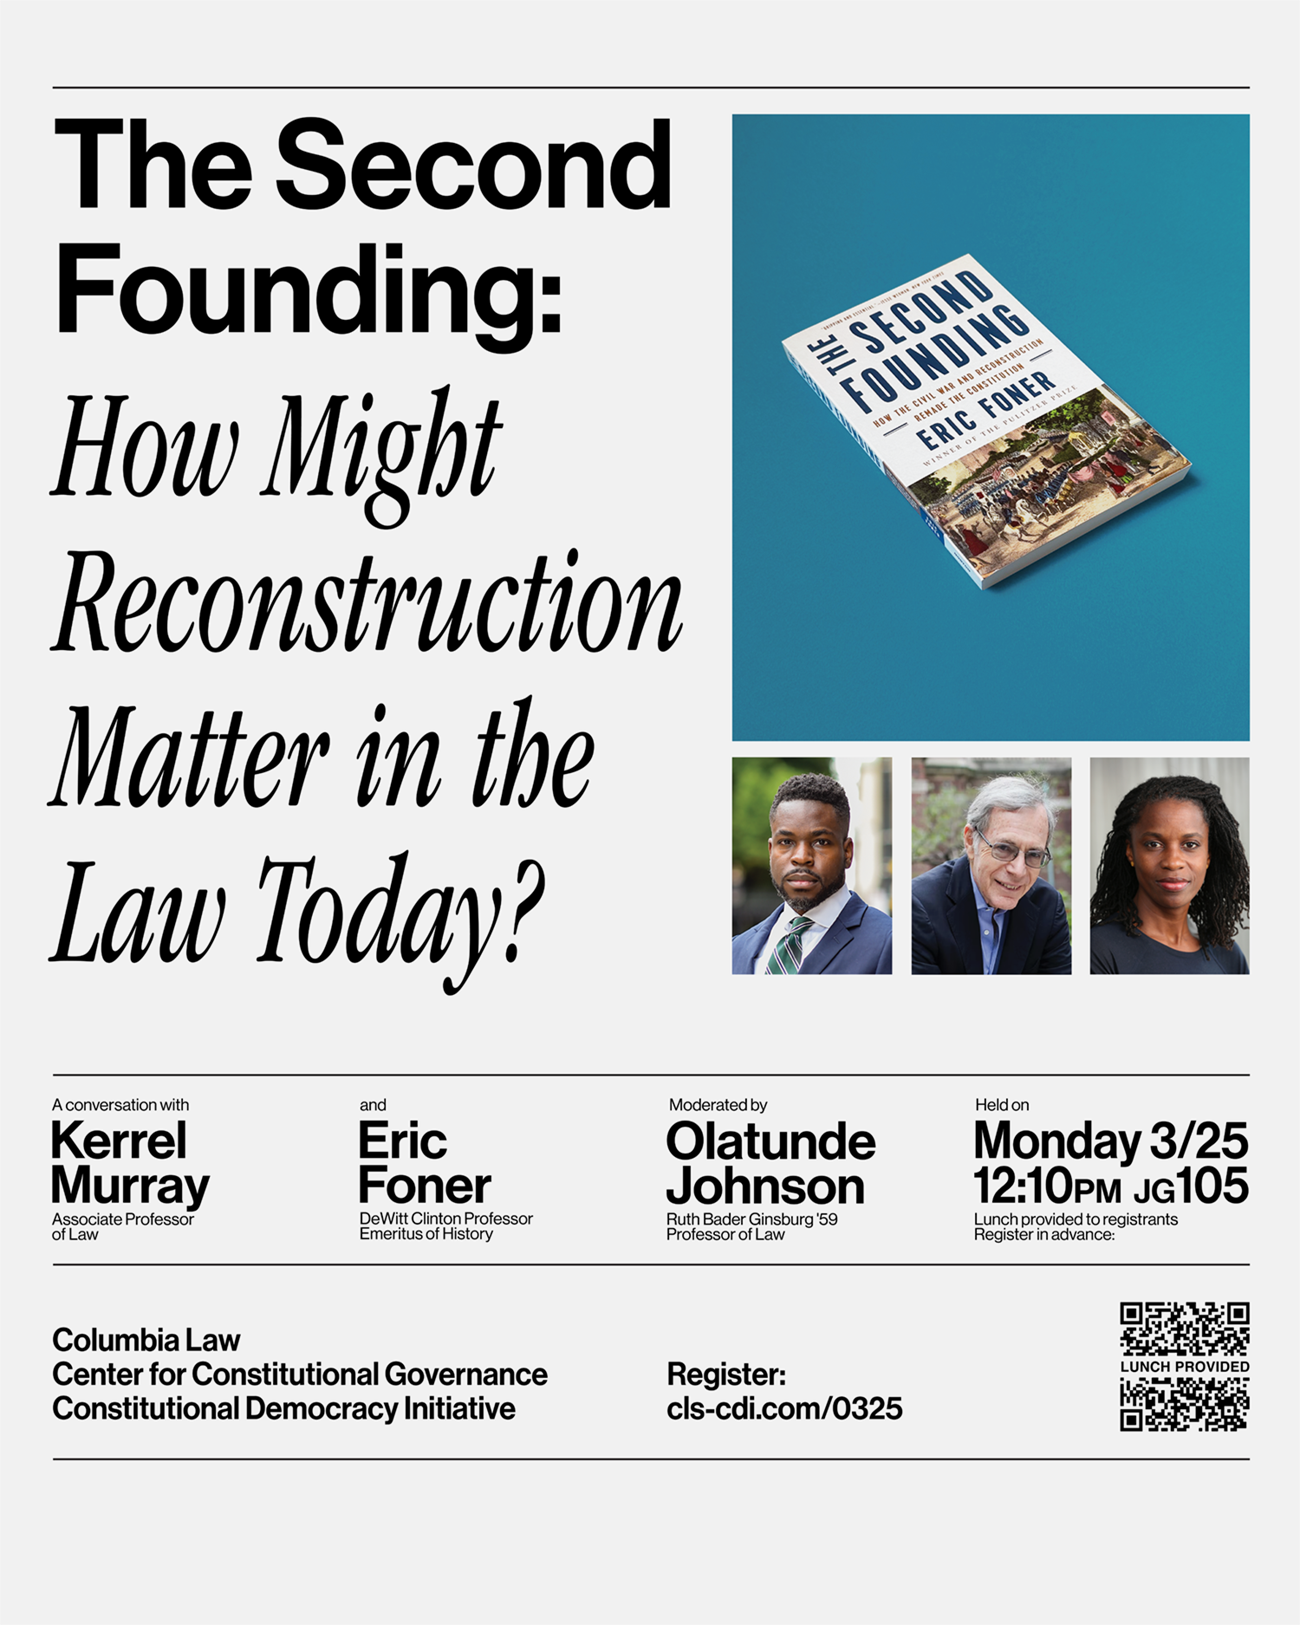 The Second Founding: How Might Reconstruction Matter in the Law Today?